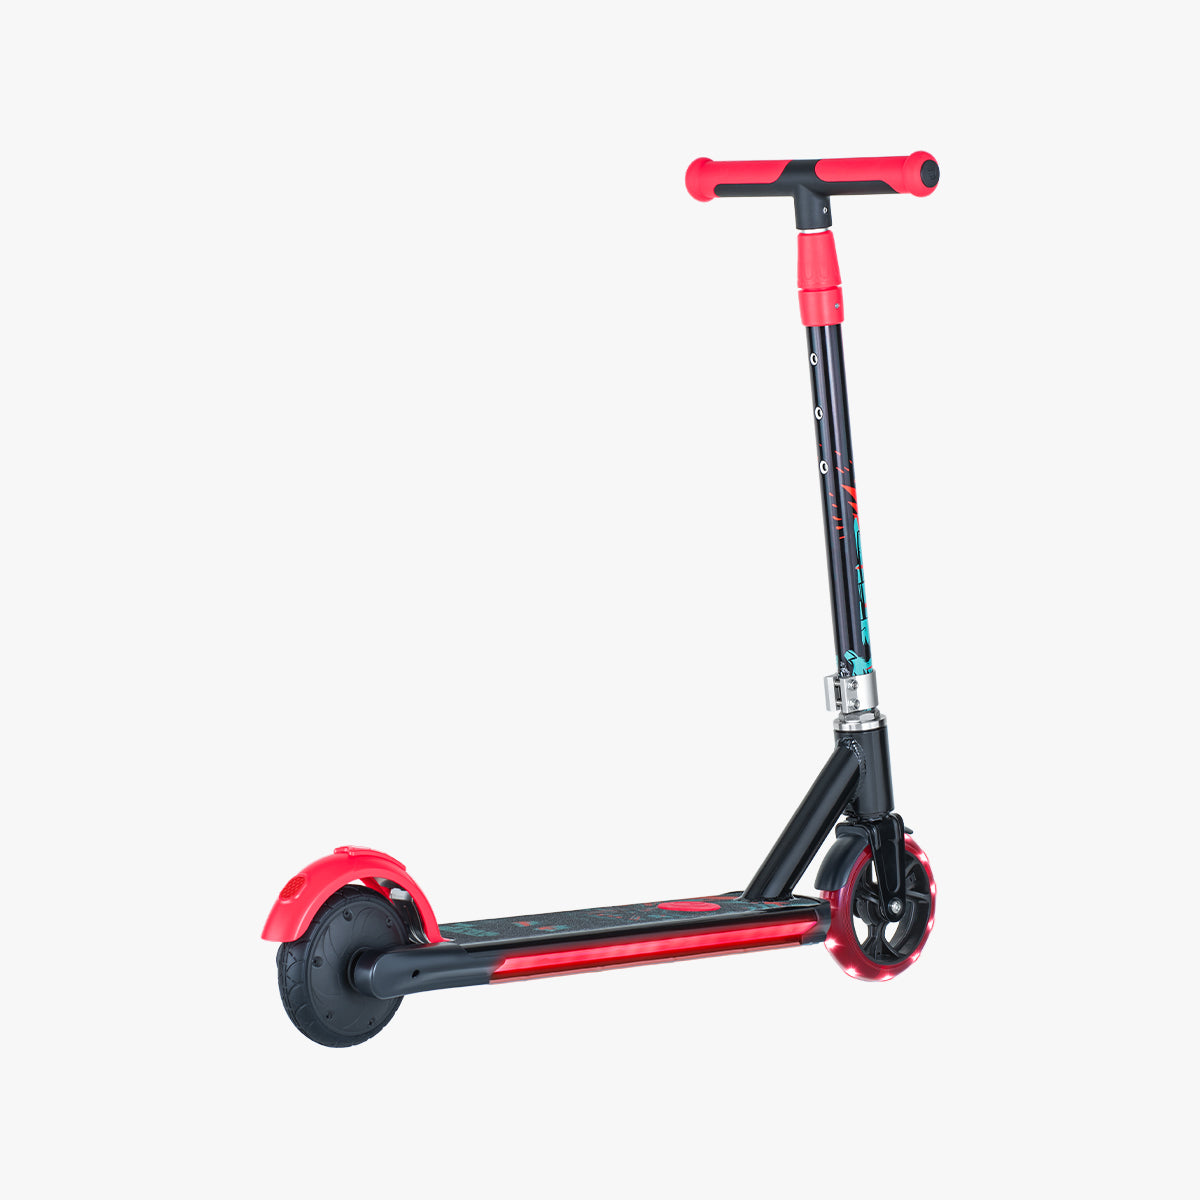 rear angle view of the darth vader electric scooter facing the right